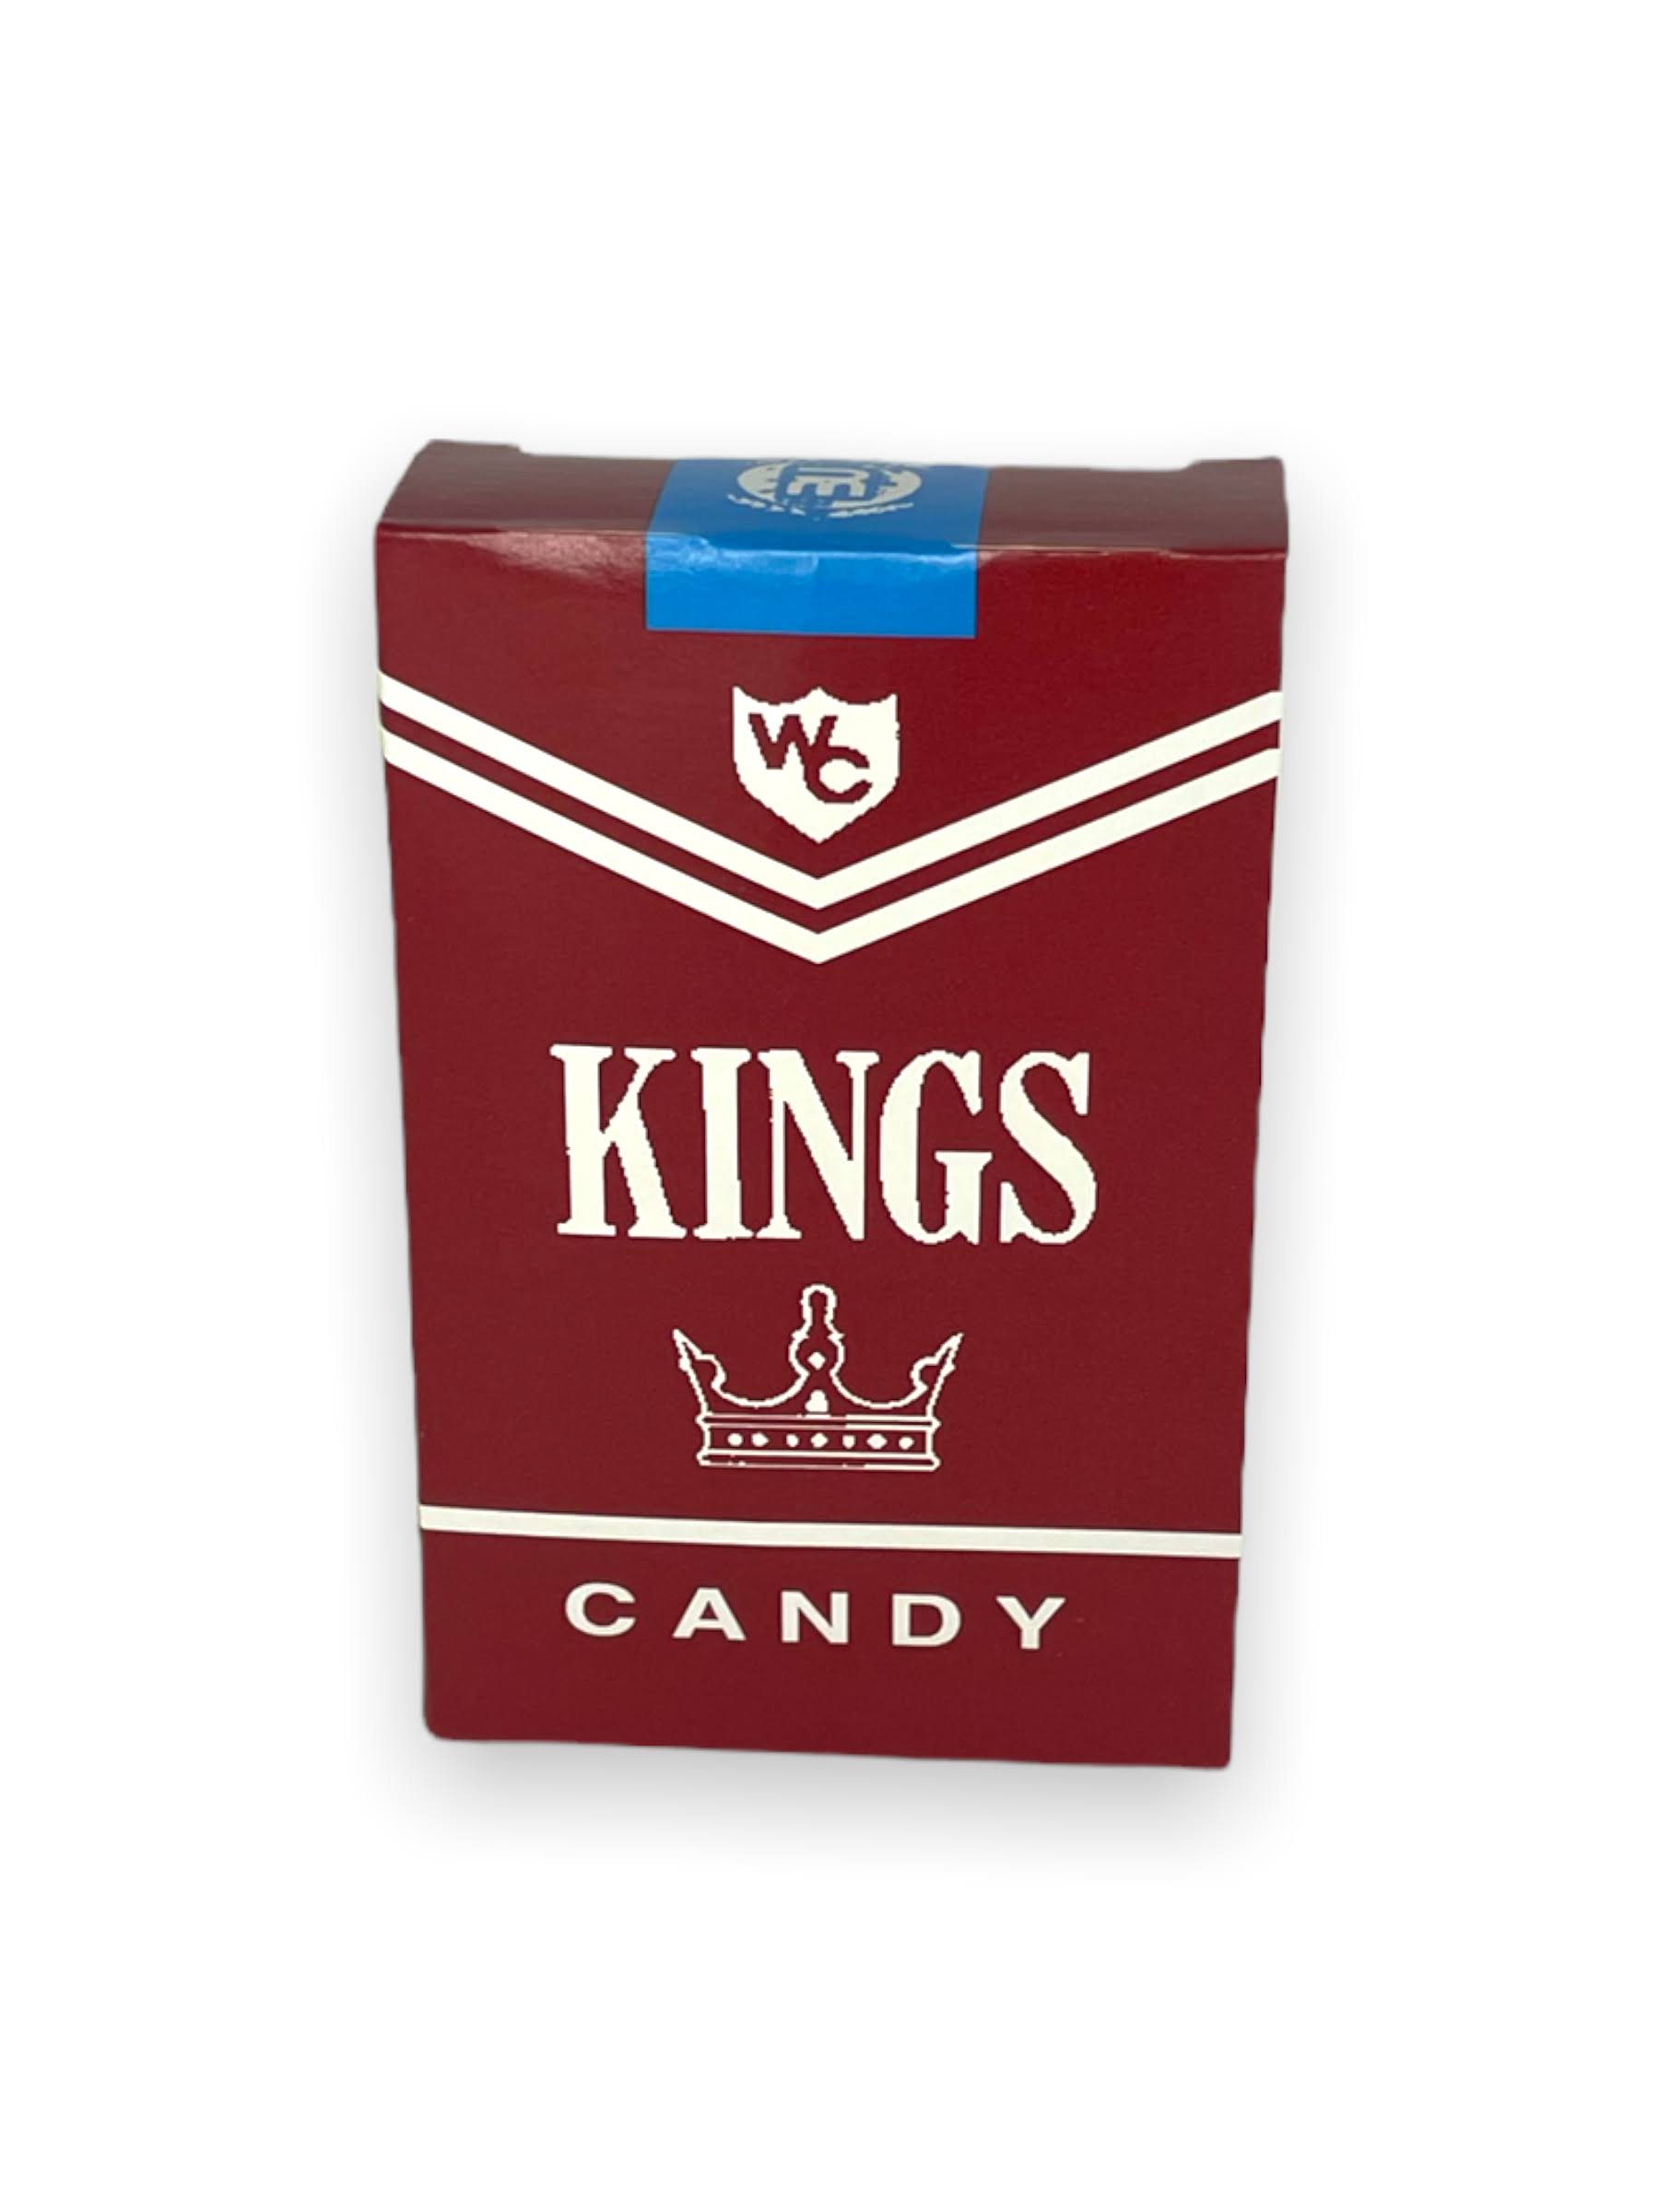 World's Candy Cigarettes